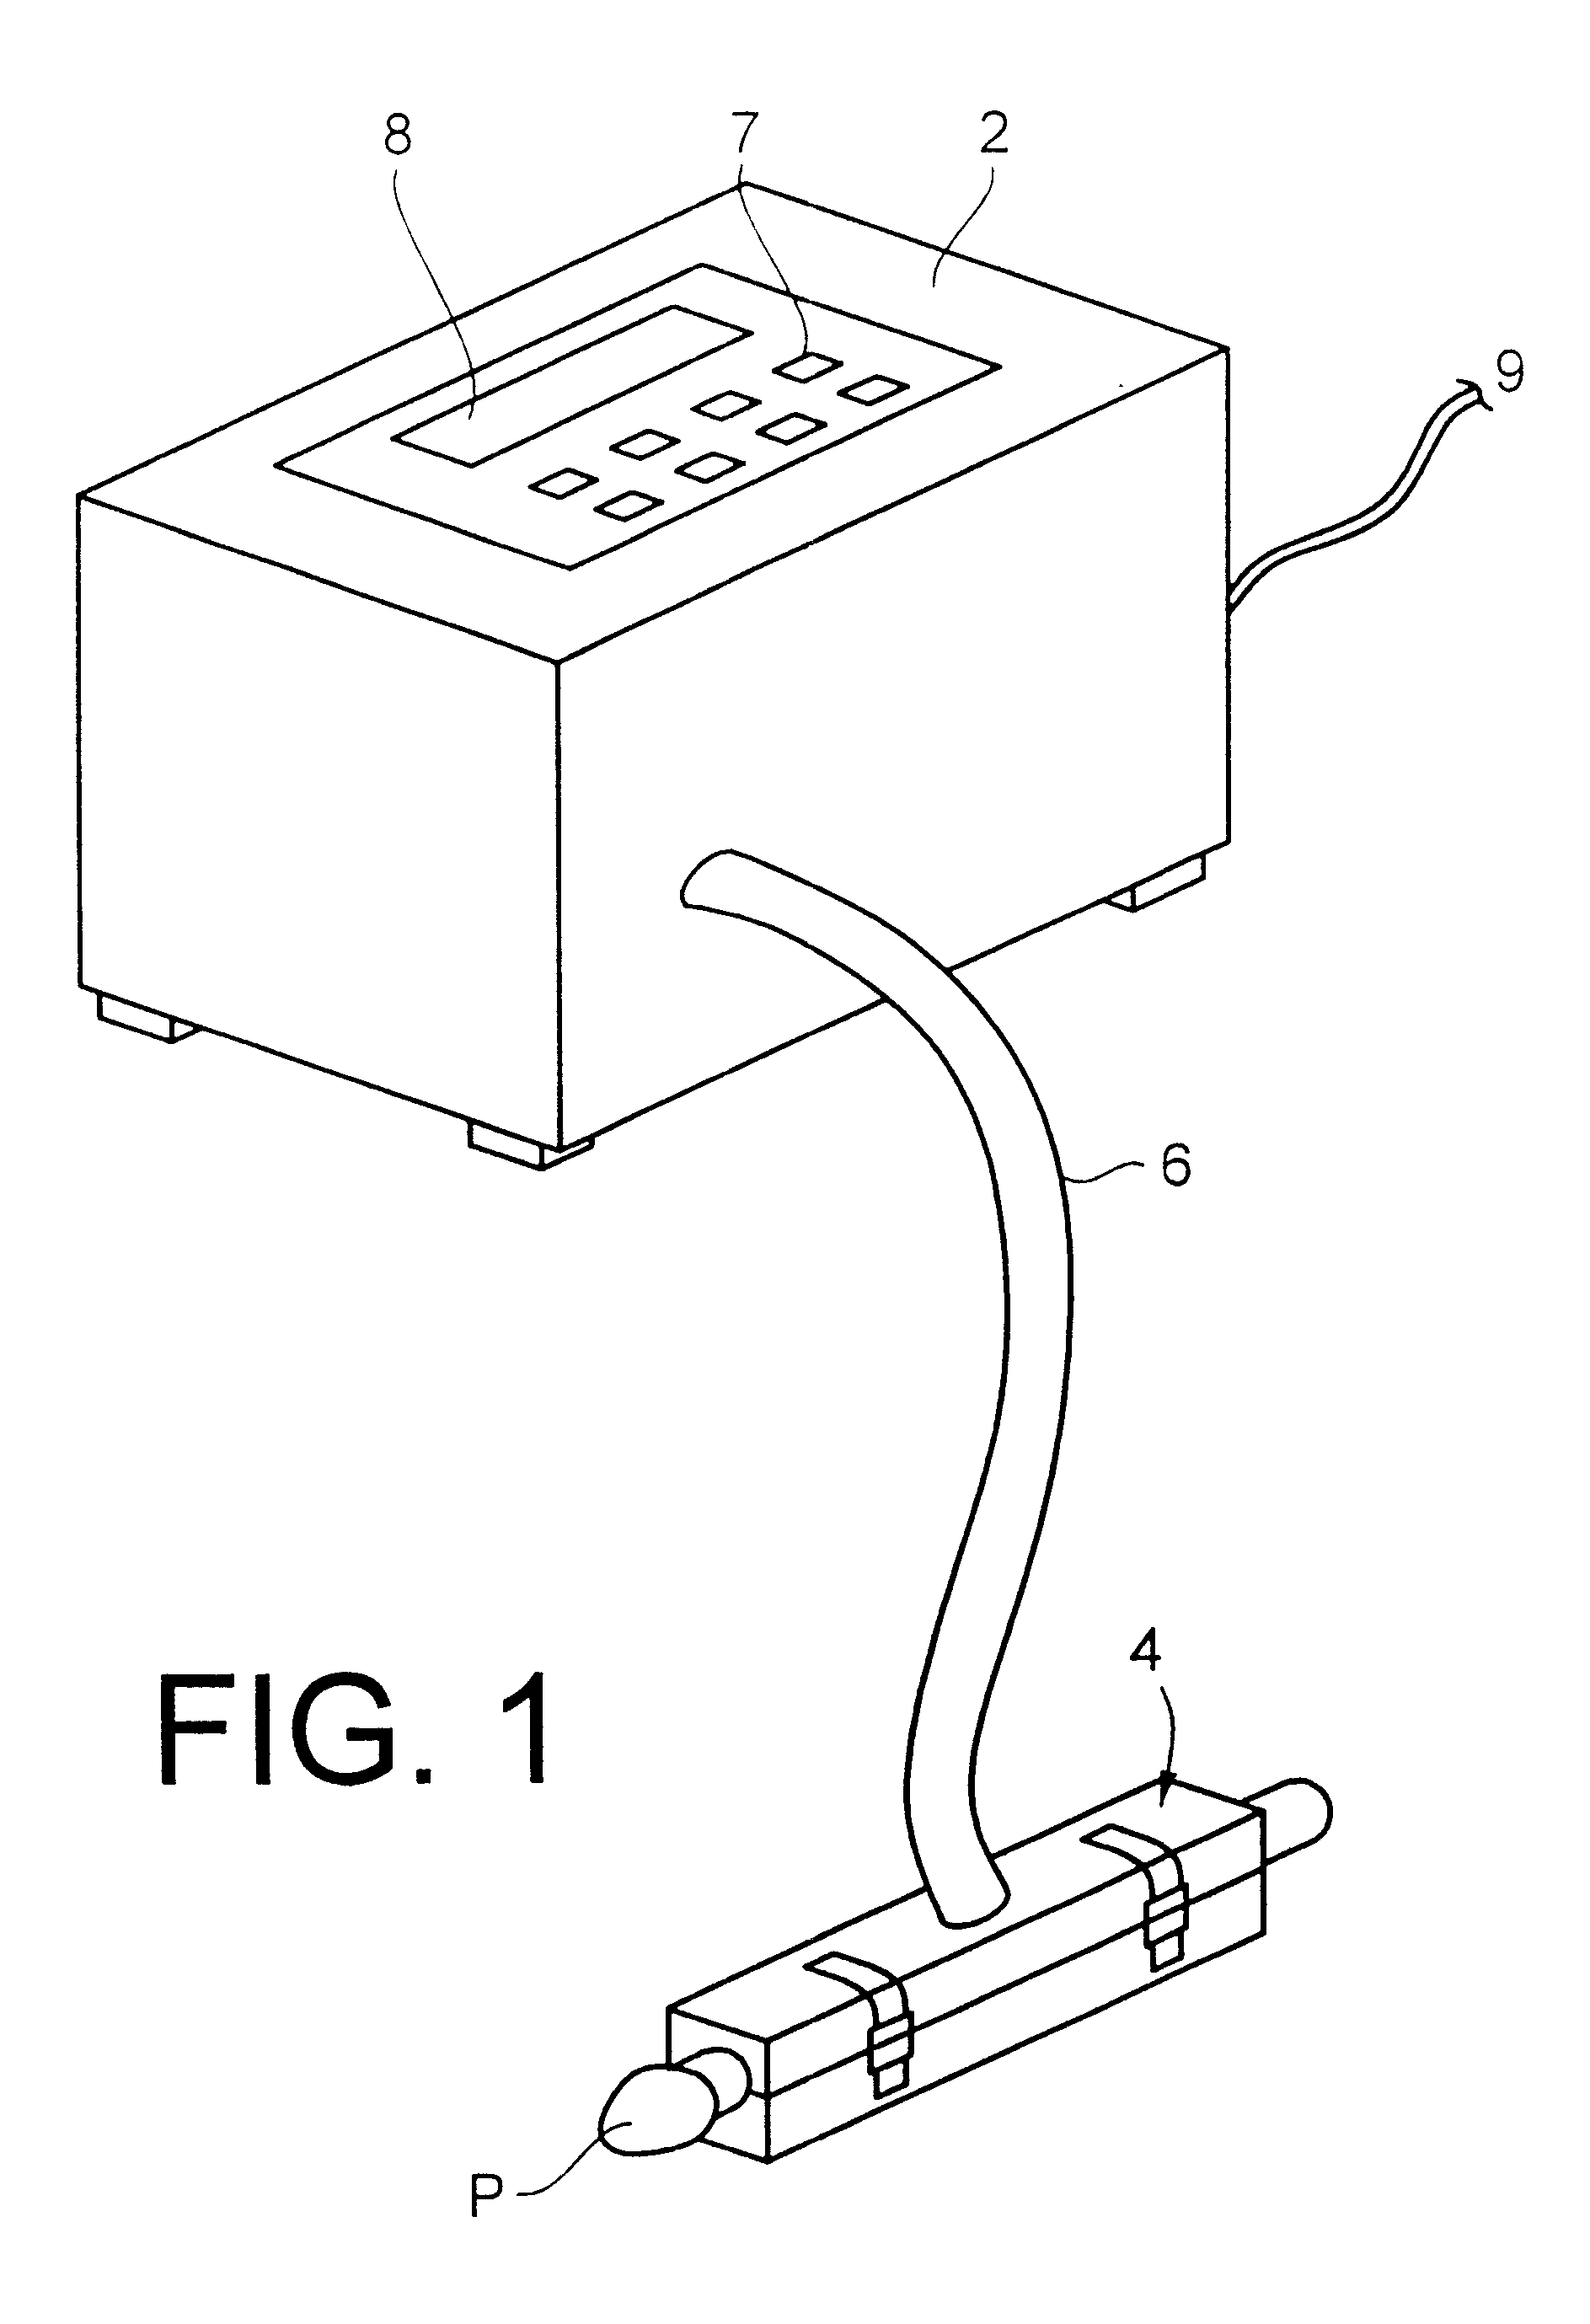 Method of treating for impotence and apparatus particularly useful in such method